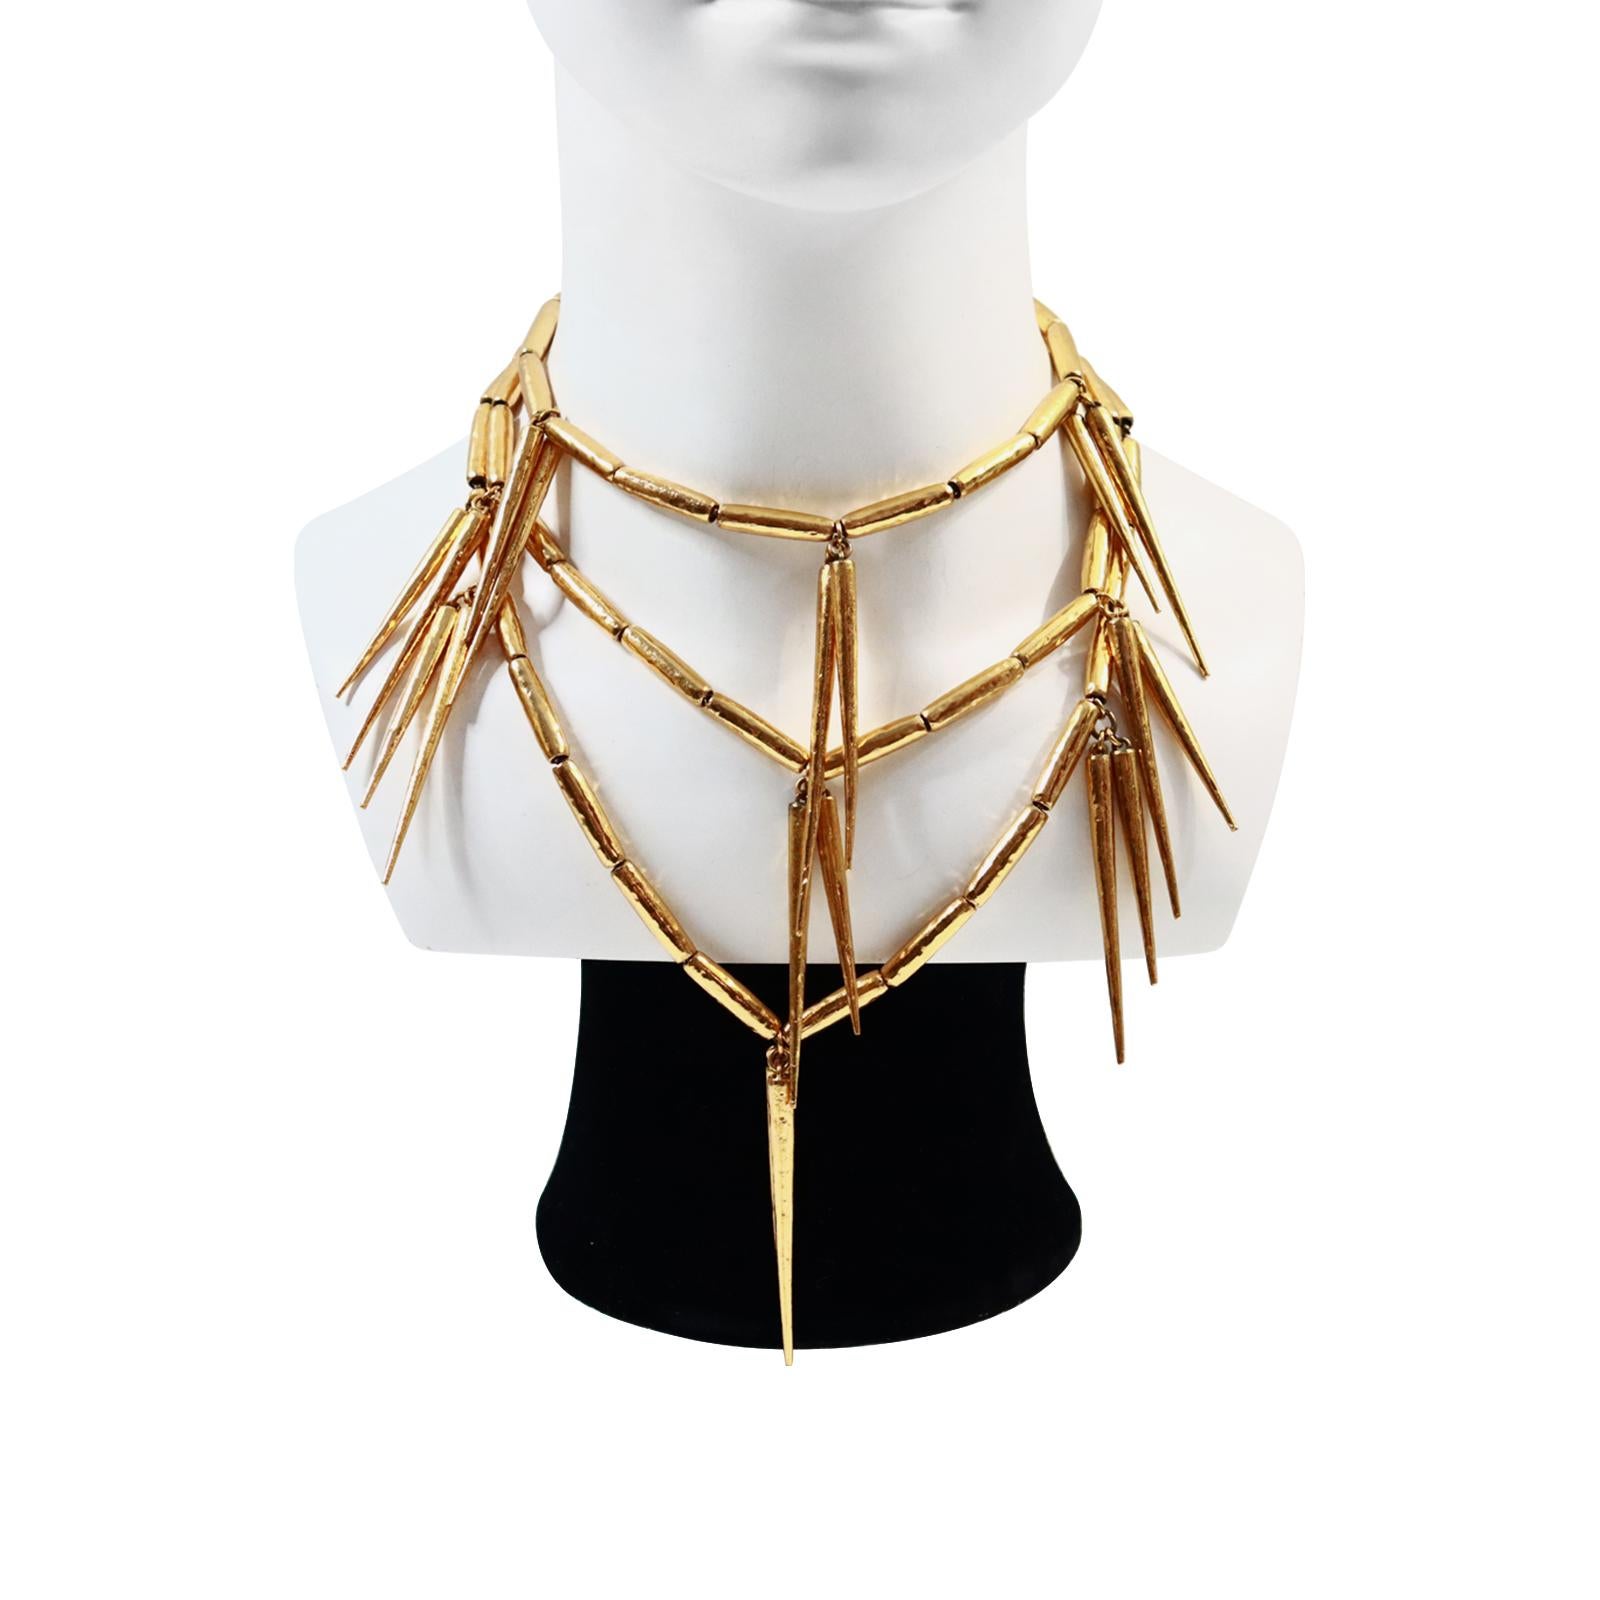 Vintage Christian Dior Gold Spike Necklace Circa 1980s For Sale 6